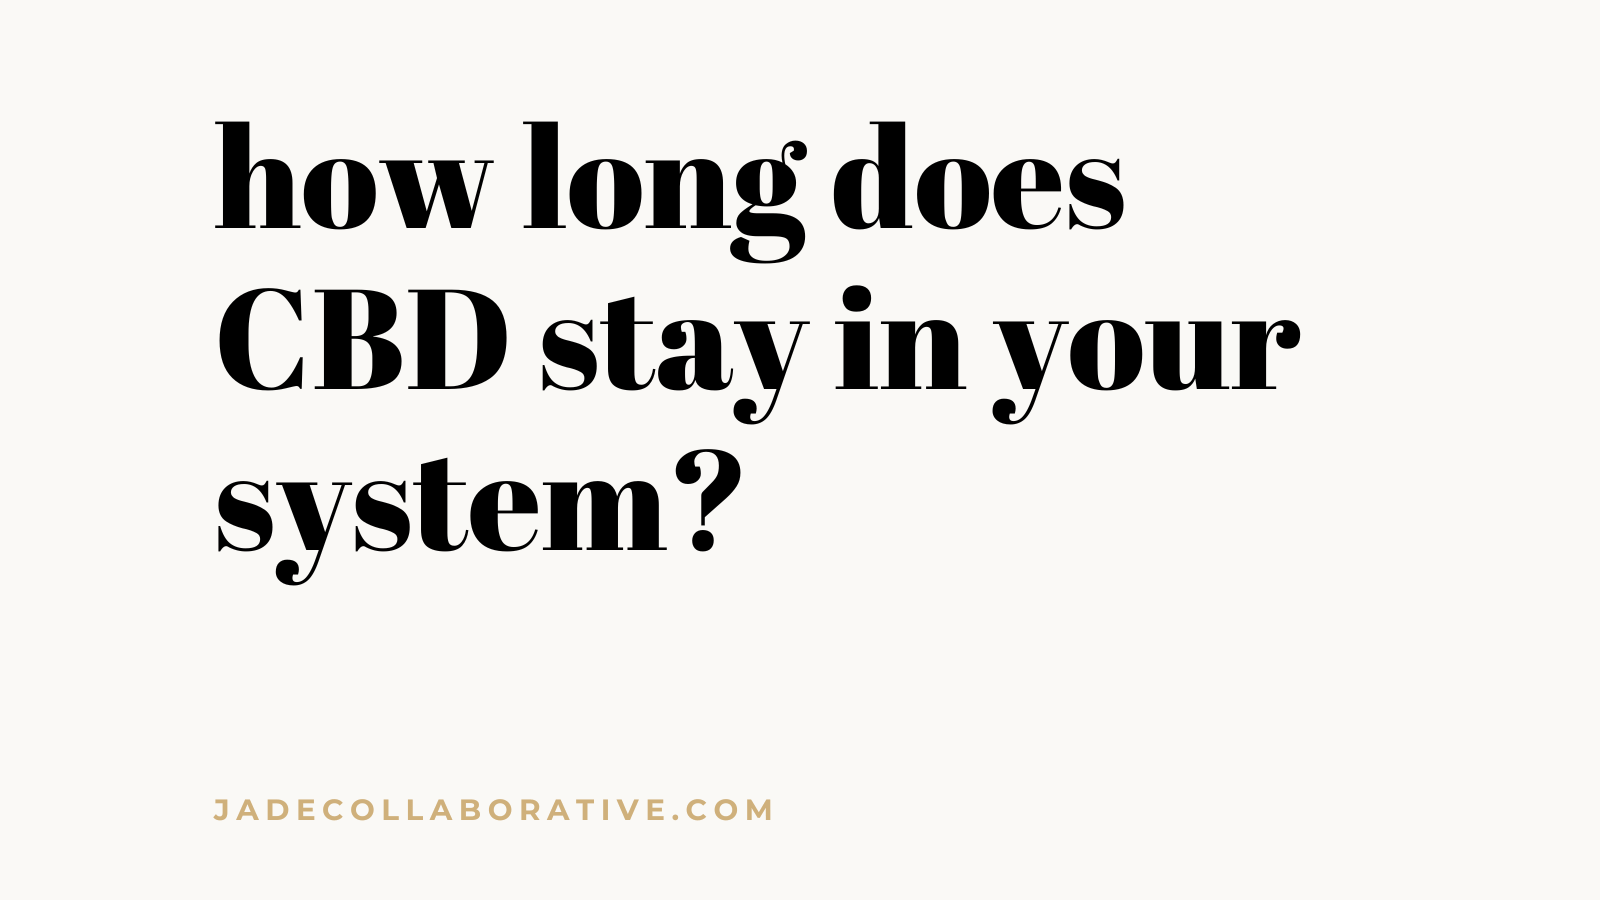 how long does cbd stay in you system - an artical about cbd effects duration and detection